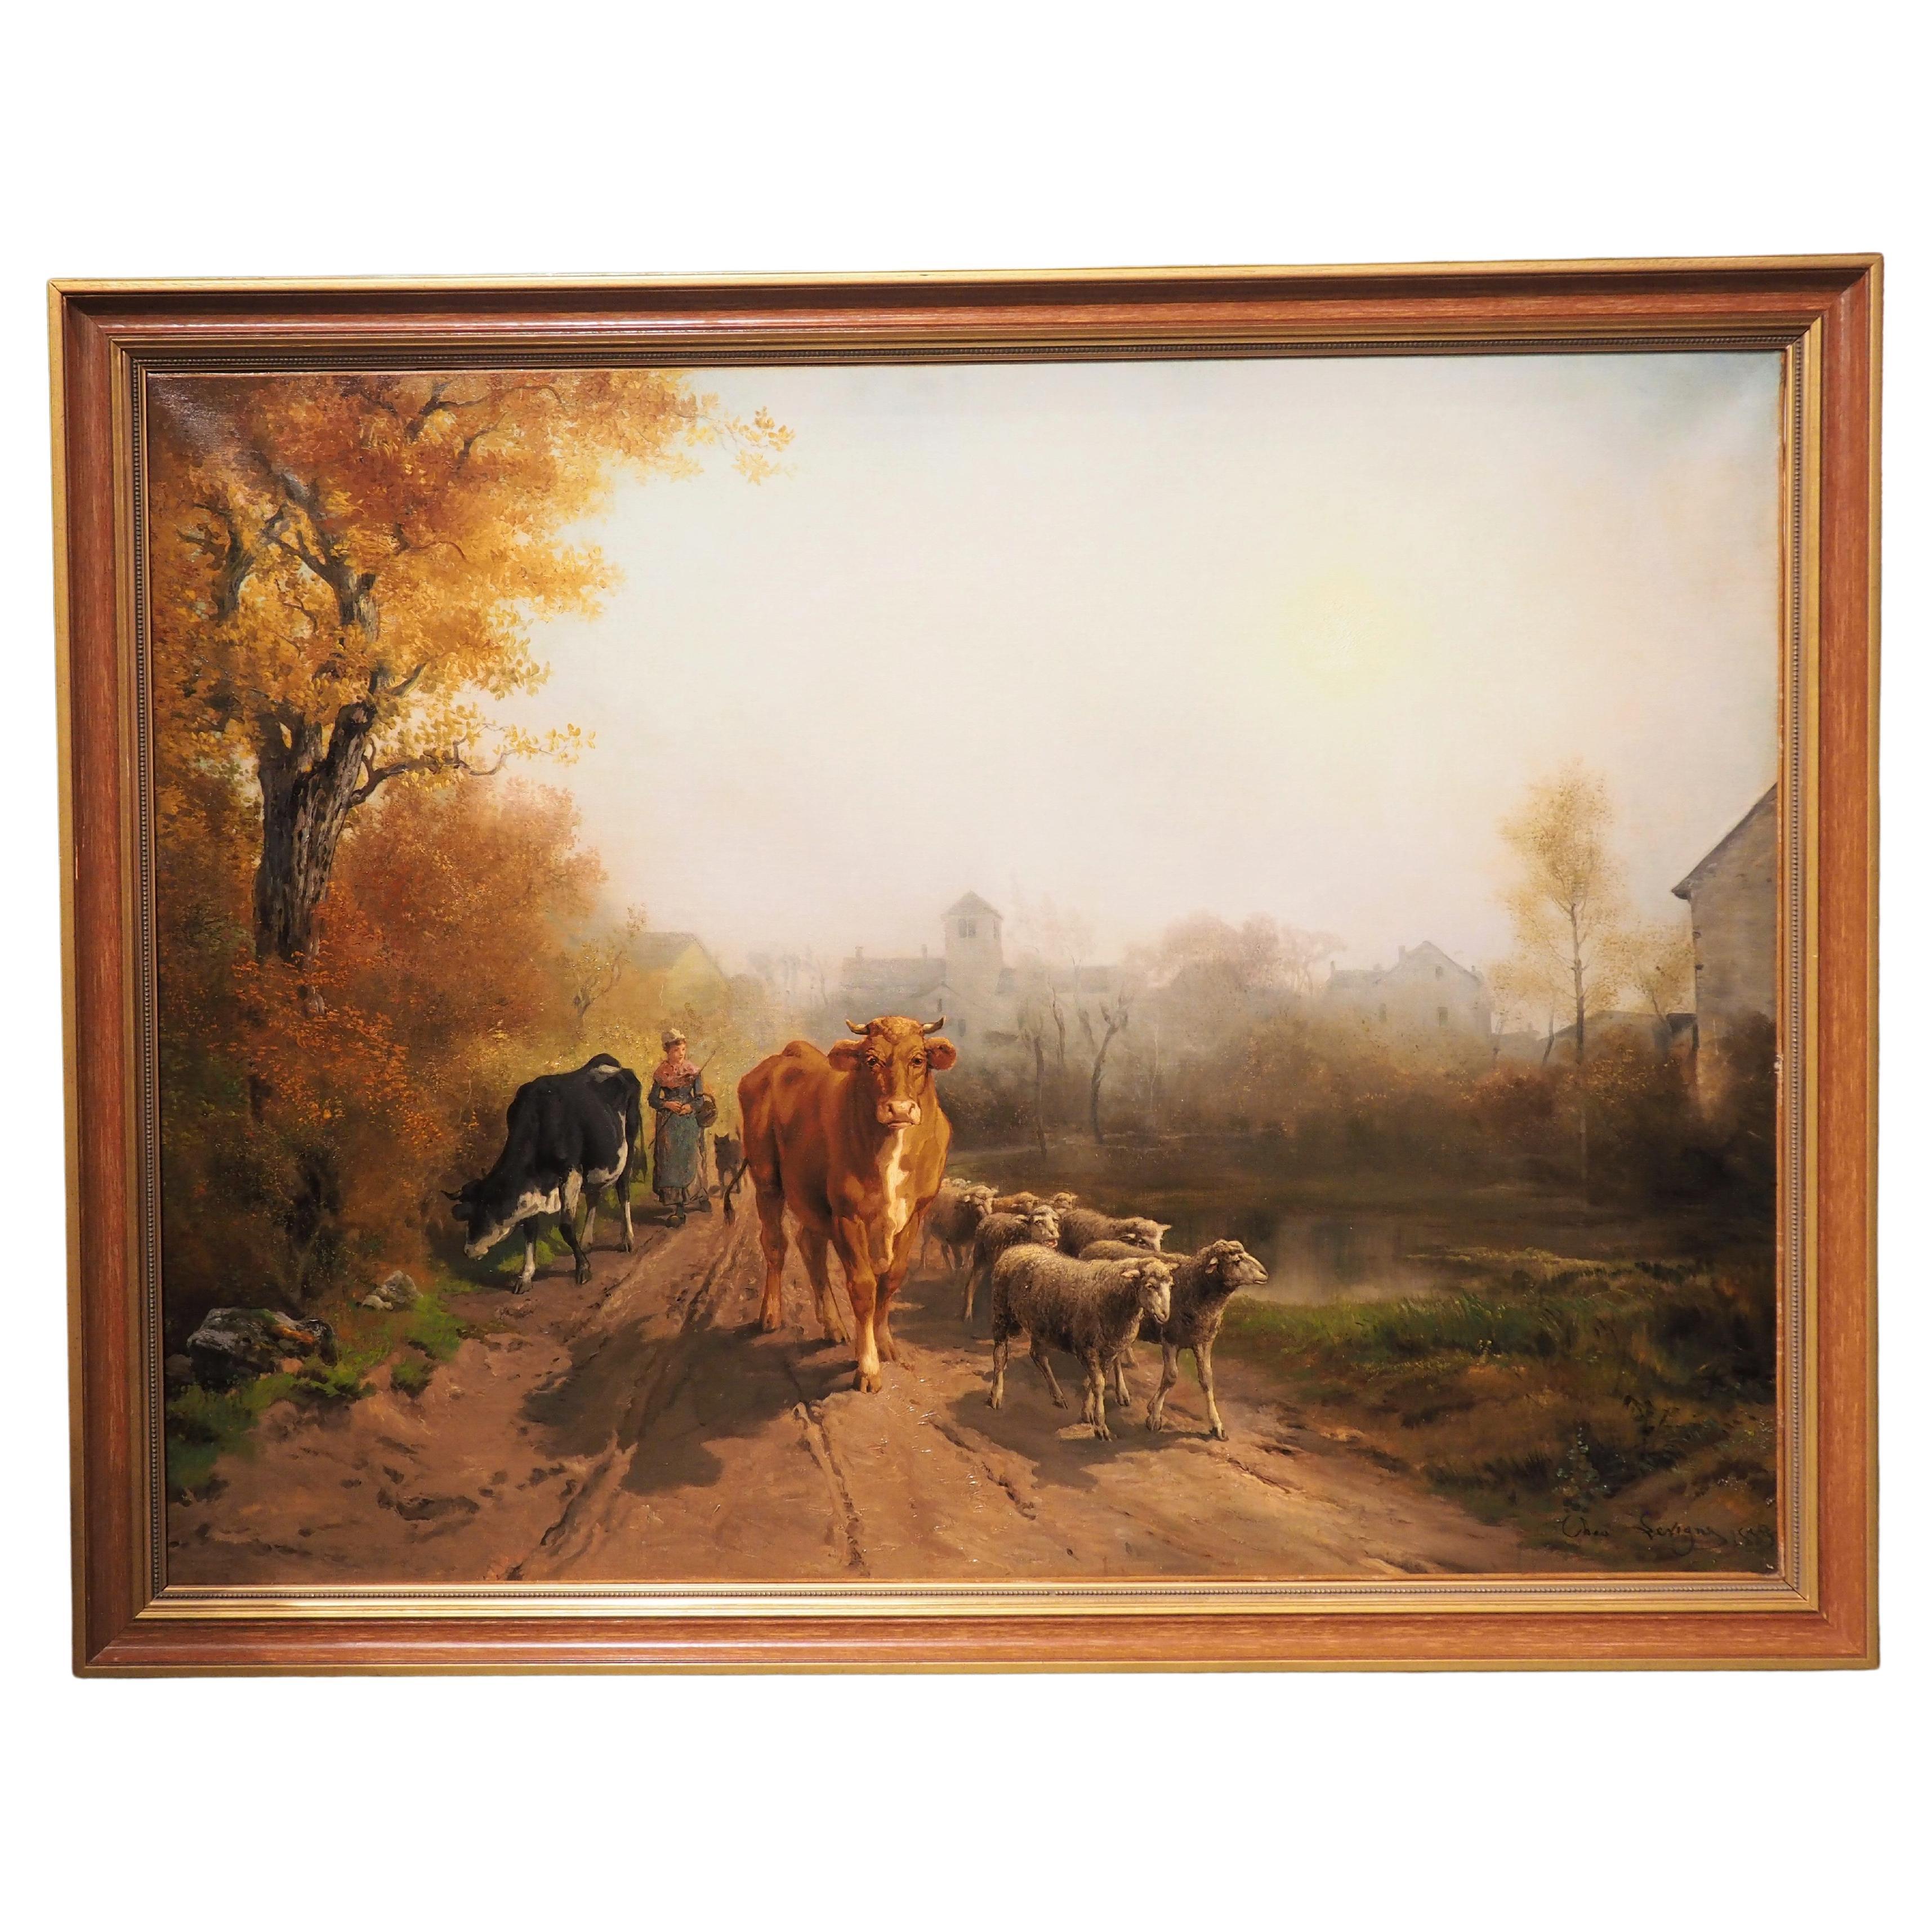 Large Antique French Pastoral Oil Painting by Theodore Levigne, 1883